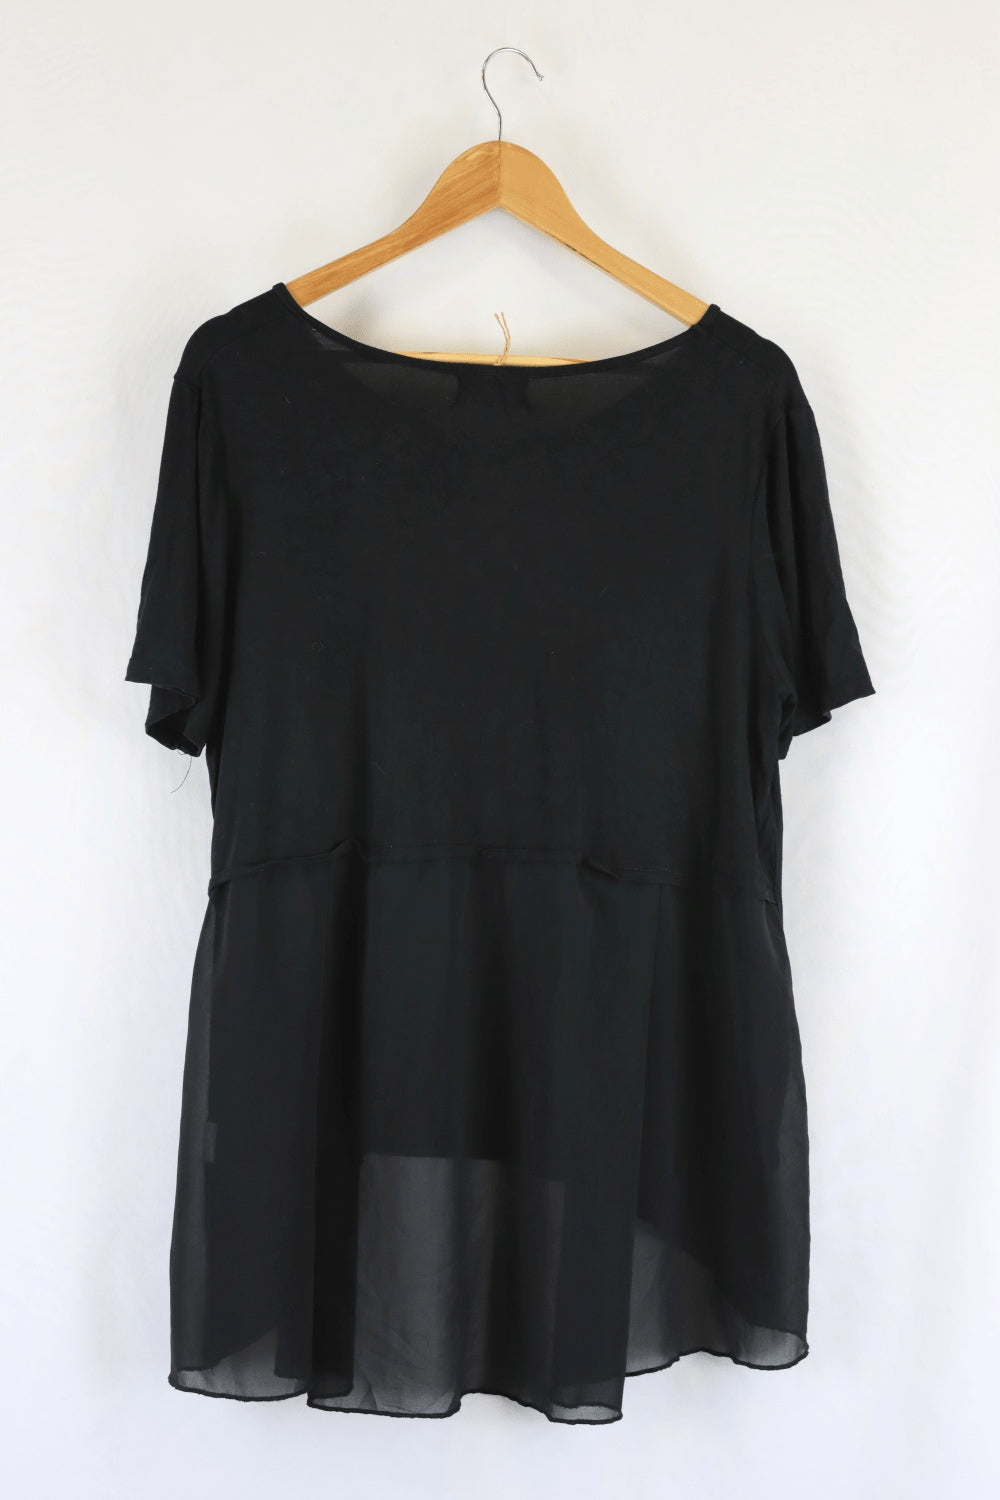 Bamboo By Whispers Black Top L